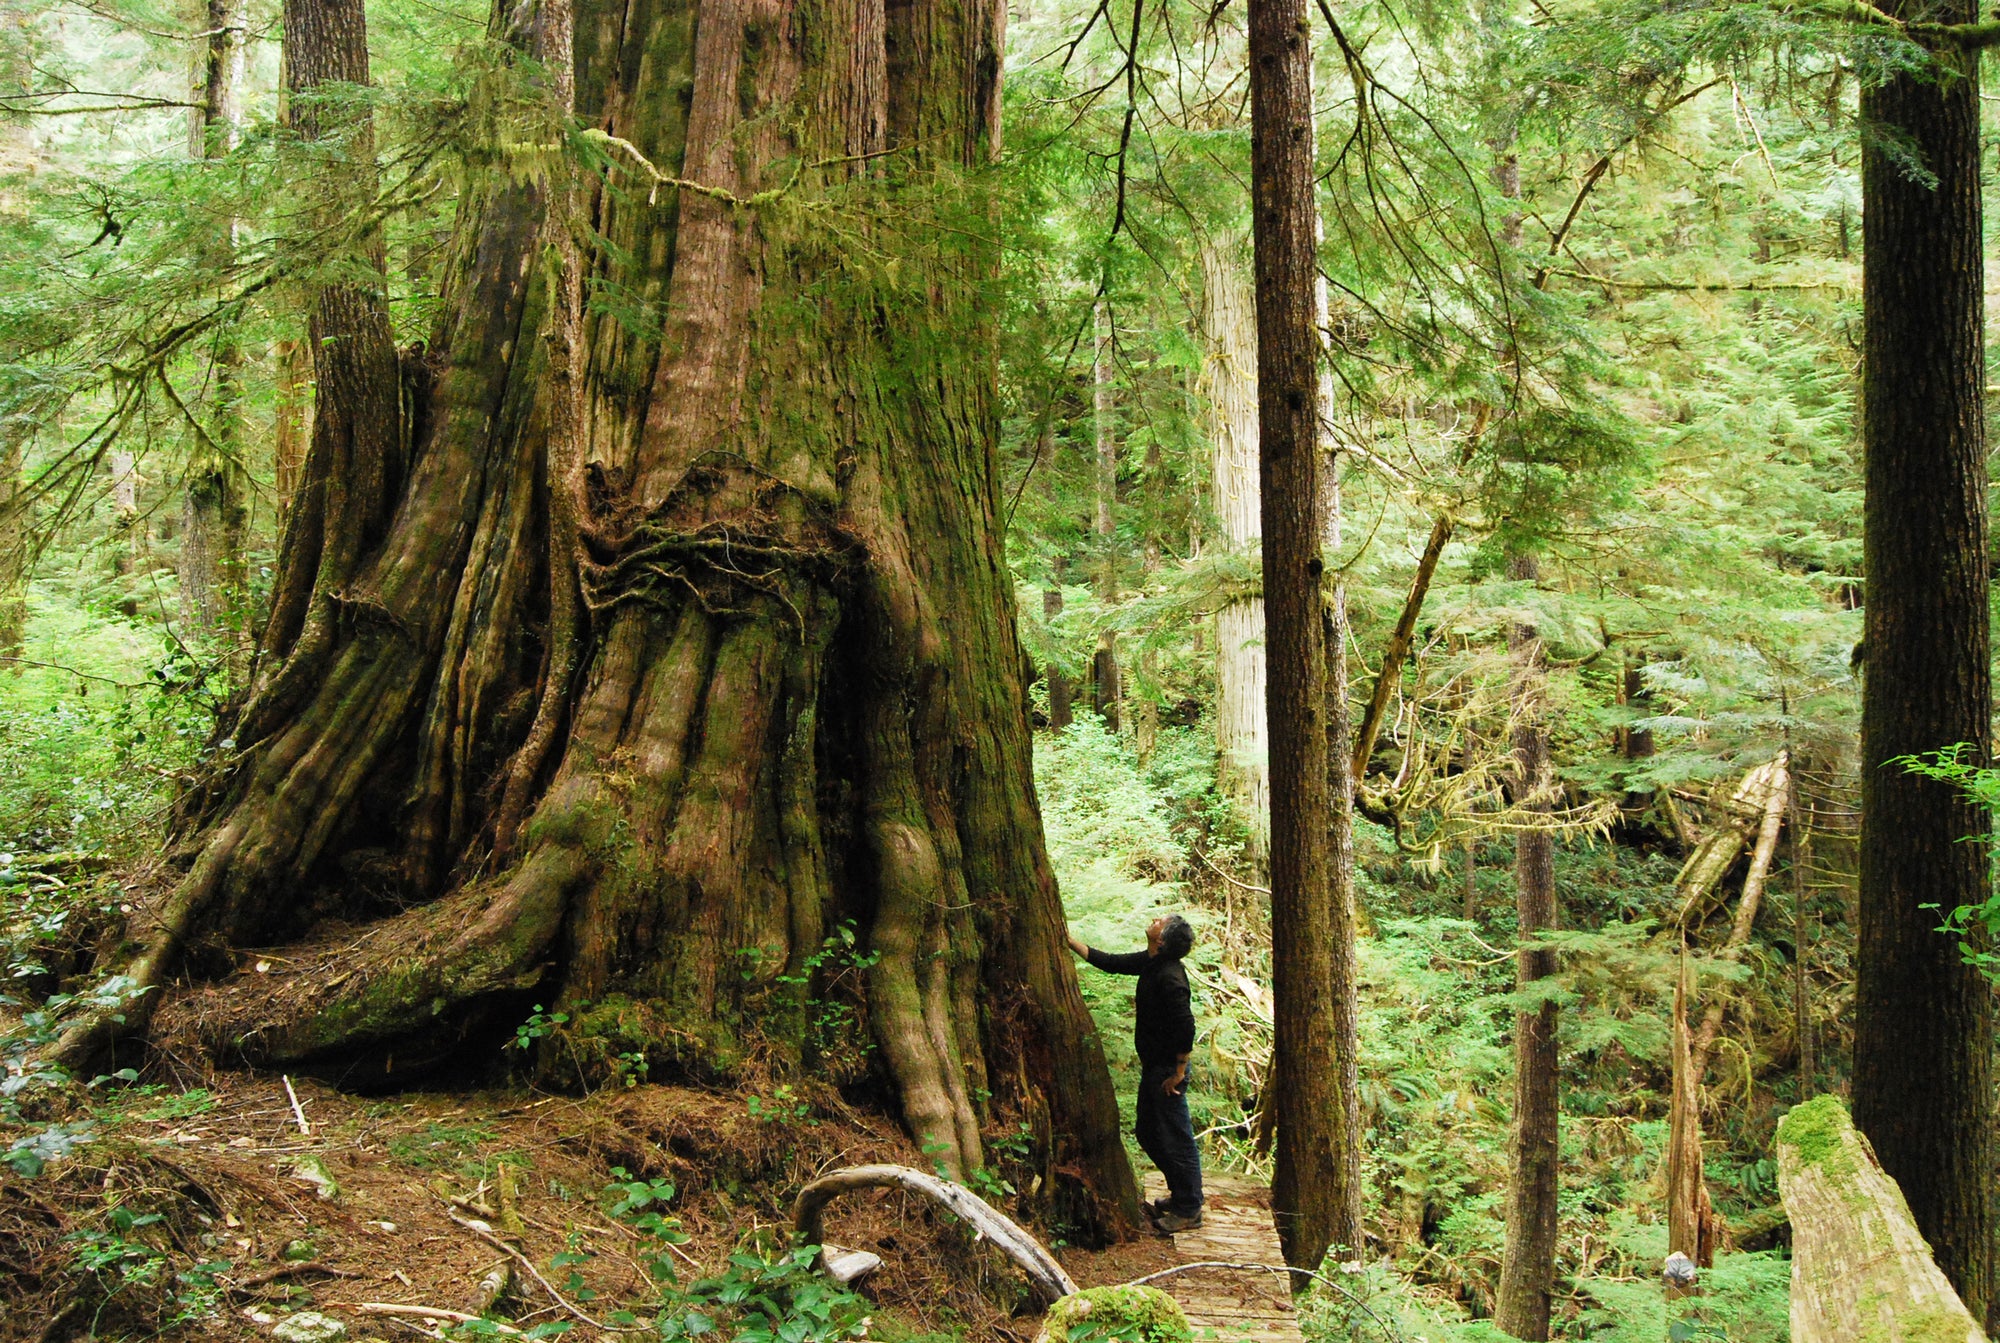 A giant red cedar tree in a forest, with a person leaning on one side.. End of image description.